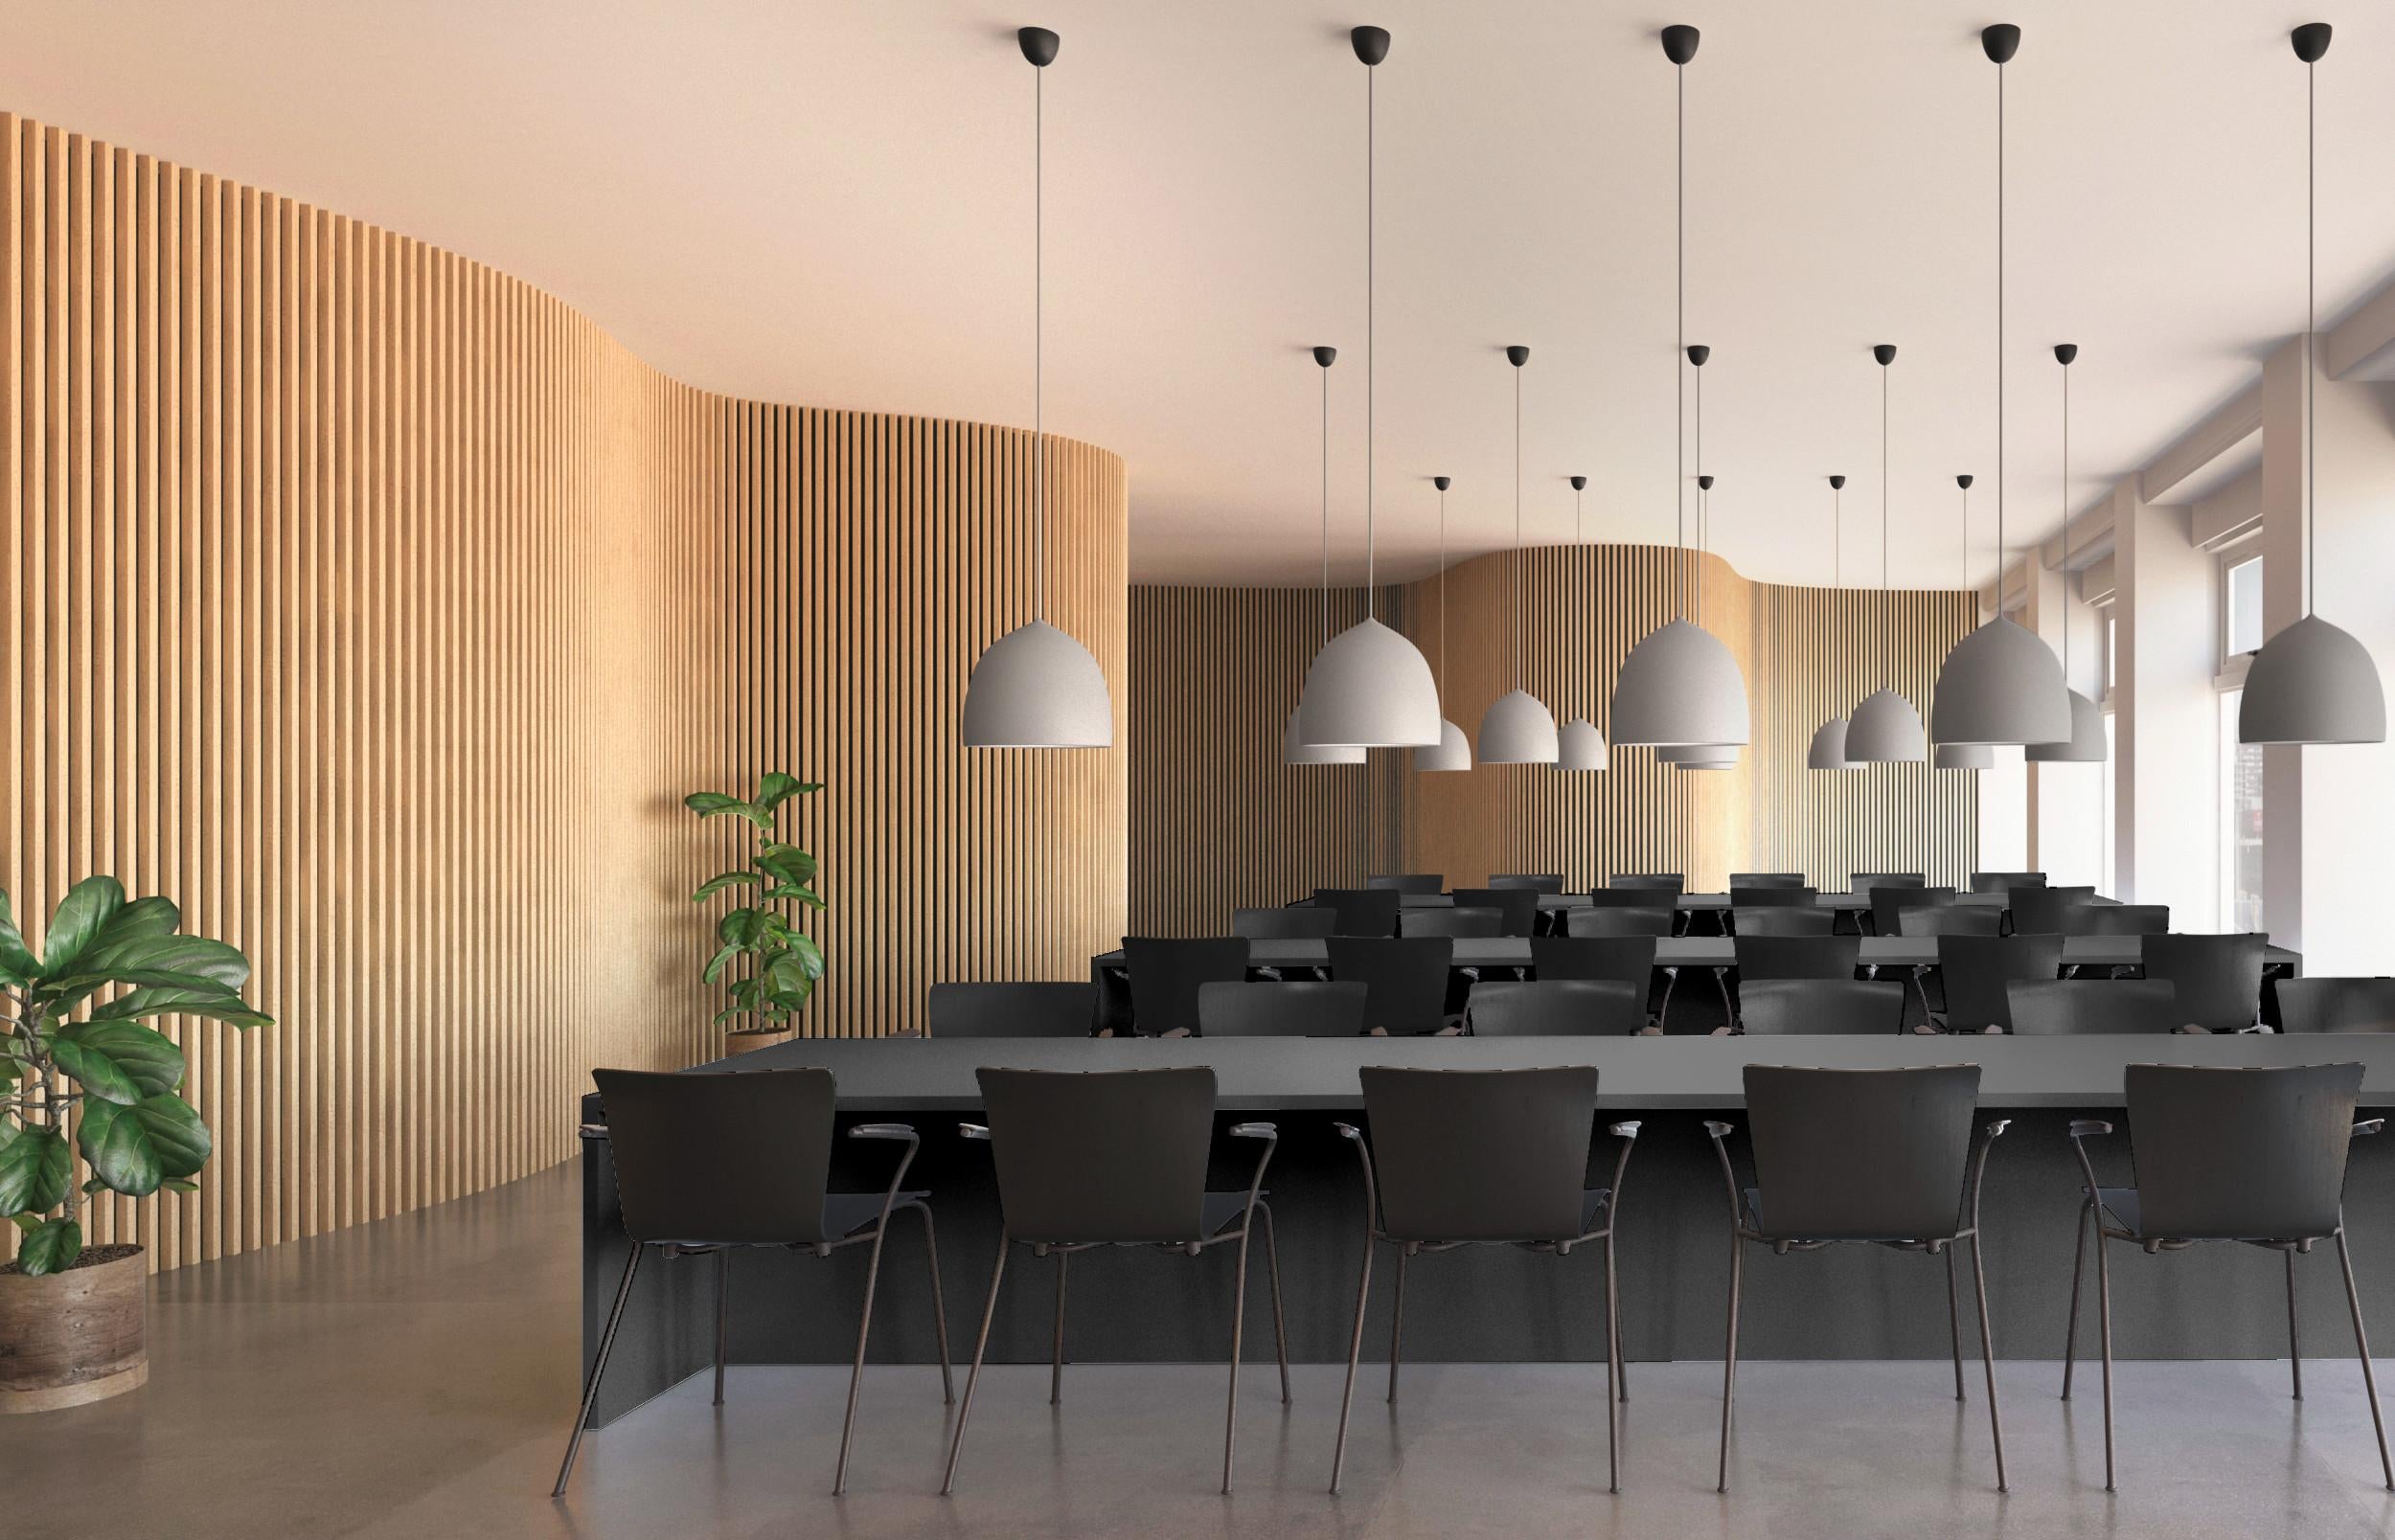 Large GamFratesi 'Suspence P2' Pendant Lamp for Fritz Hansen in White.

Established in 1872, Fritz Hansen has become synonymous with legendary Danish design. Combining timeless craftsmanship with an emphasis on sustainability, the brand’s